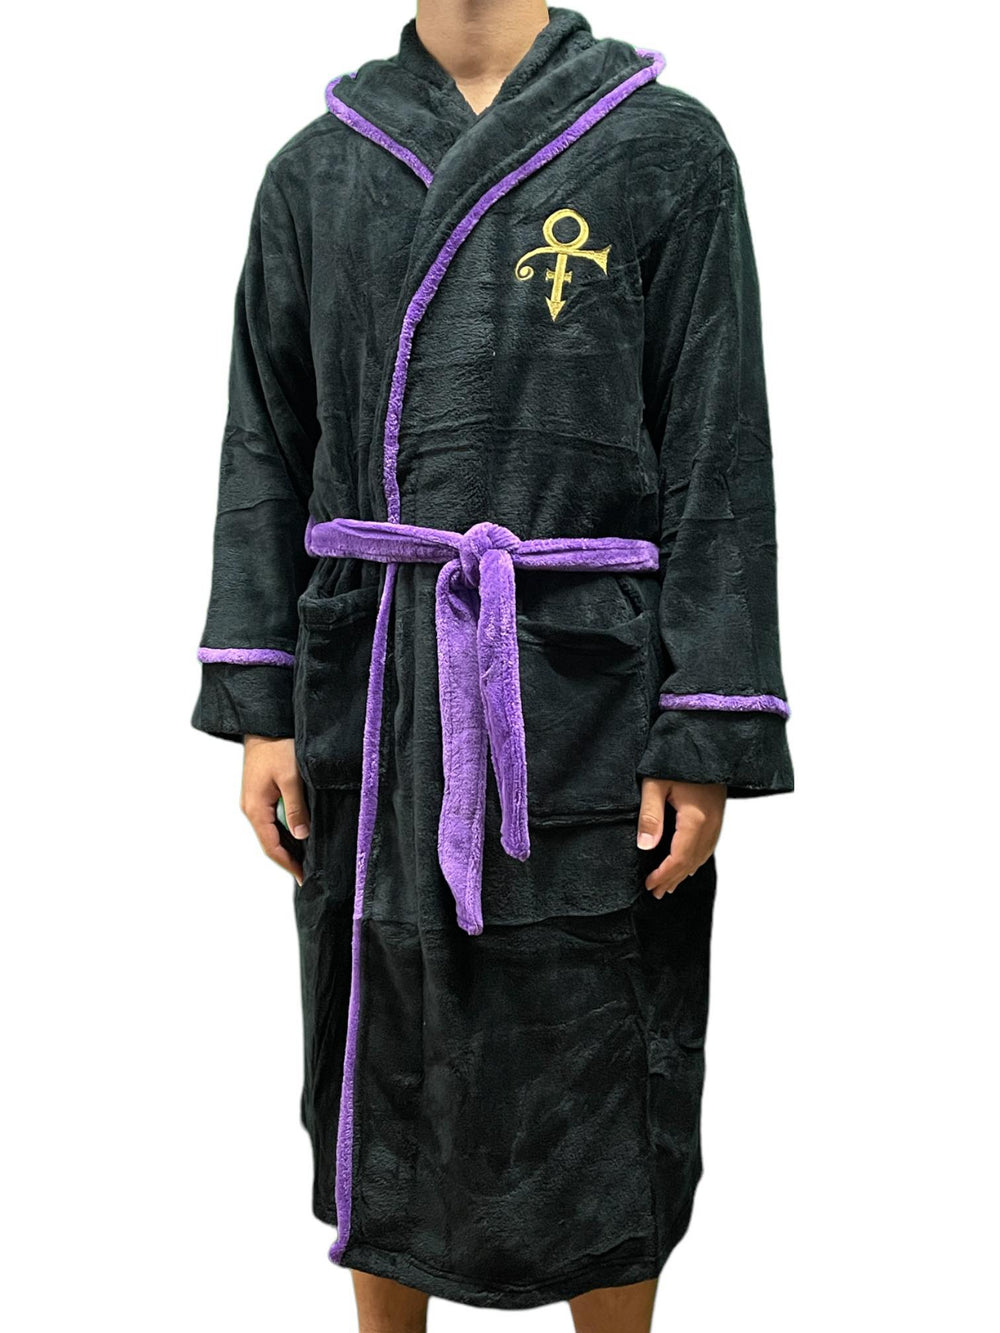 Prince – Unisex Official Doves Black & Purple Gold Embroidery Bath Robe /Dressing Gown NEW